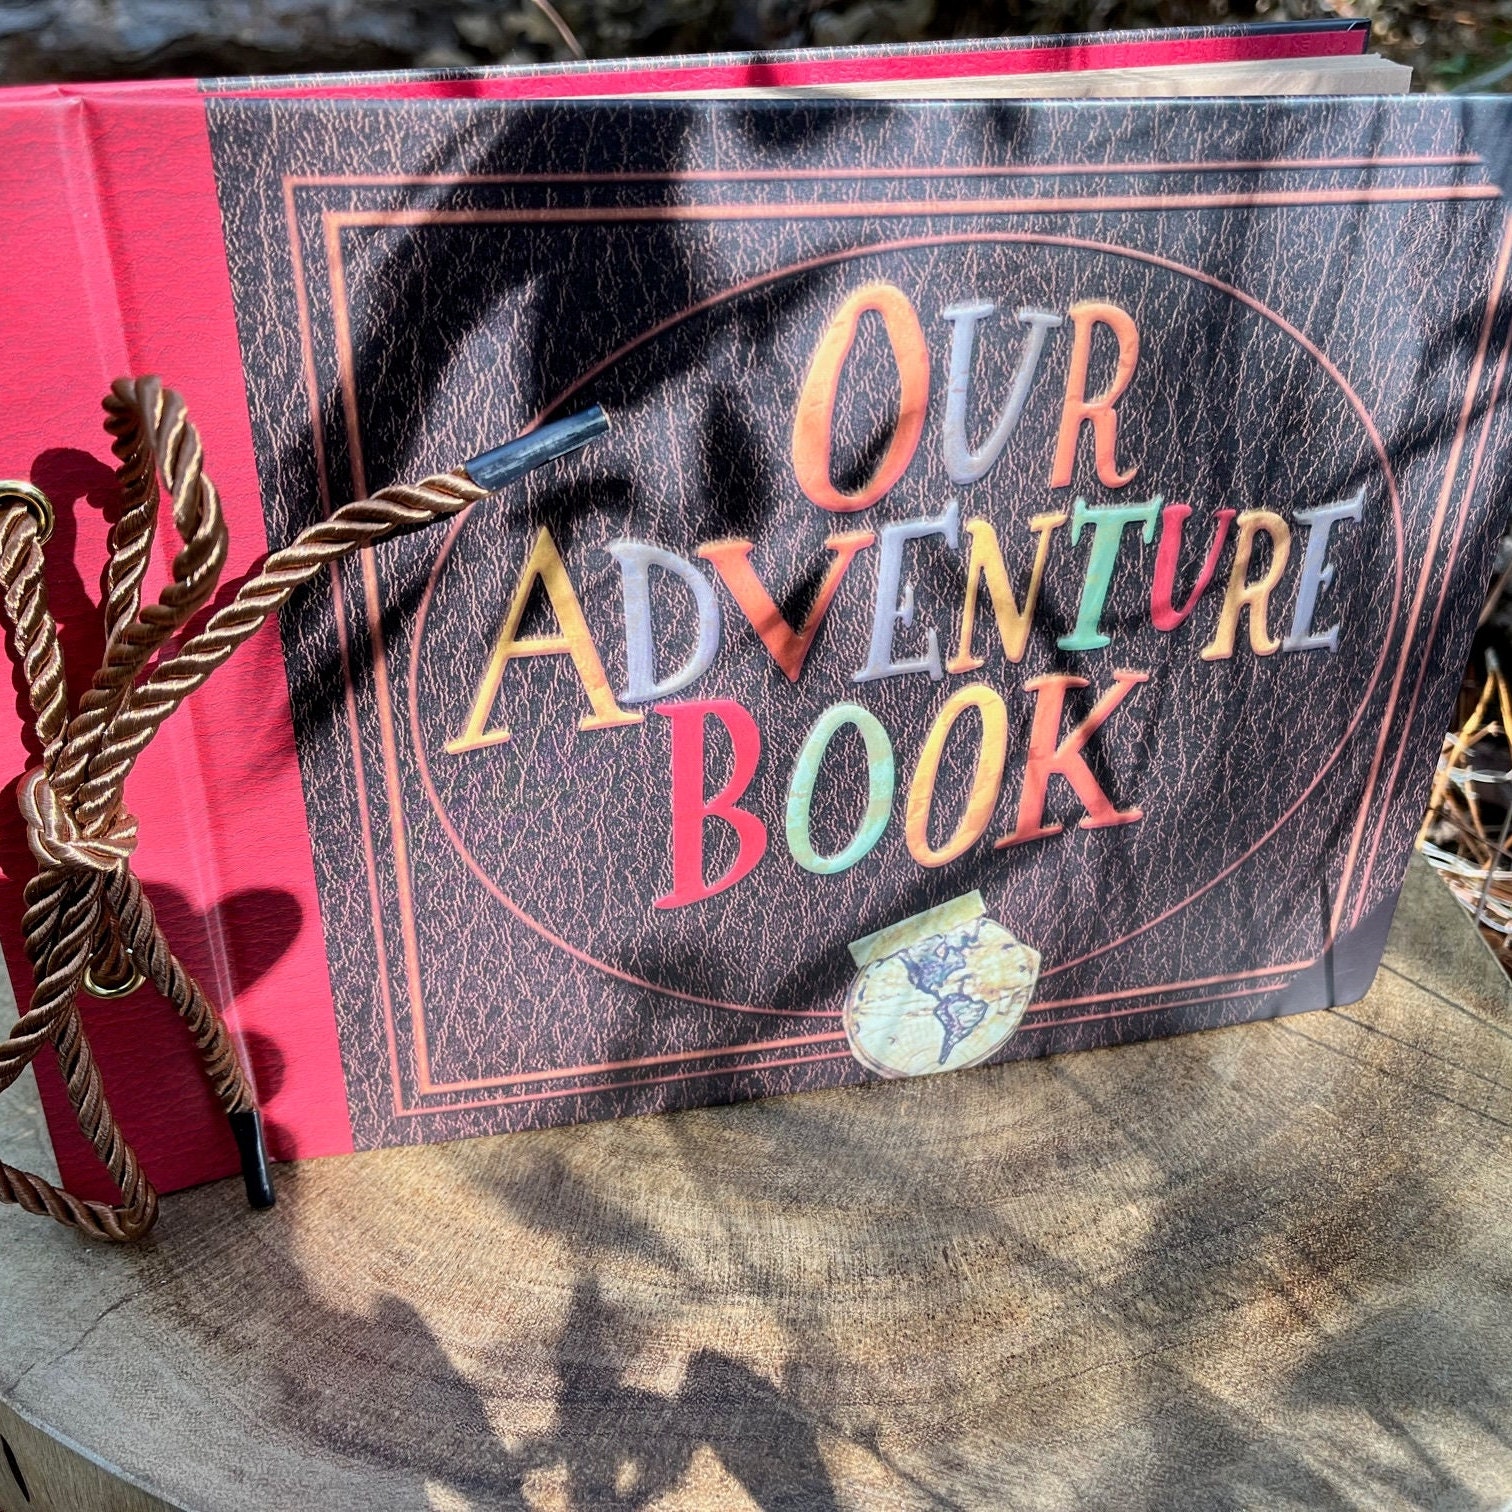 Personalized Our Adventure Book , up Scrapbook, up Photo Album, UP